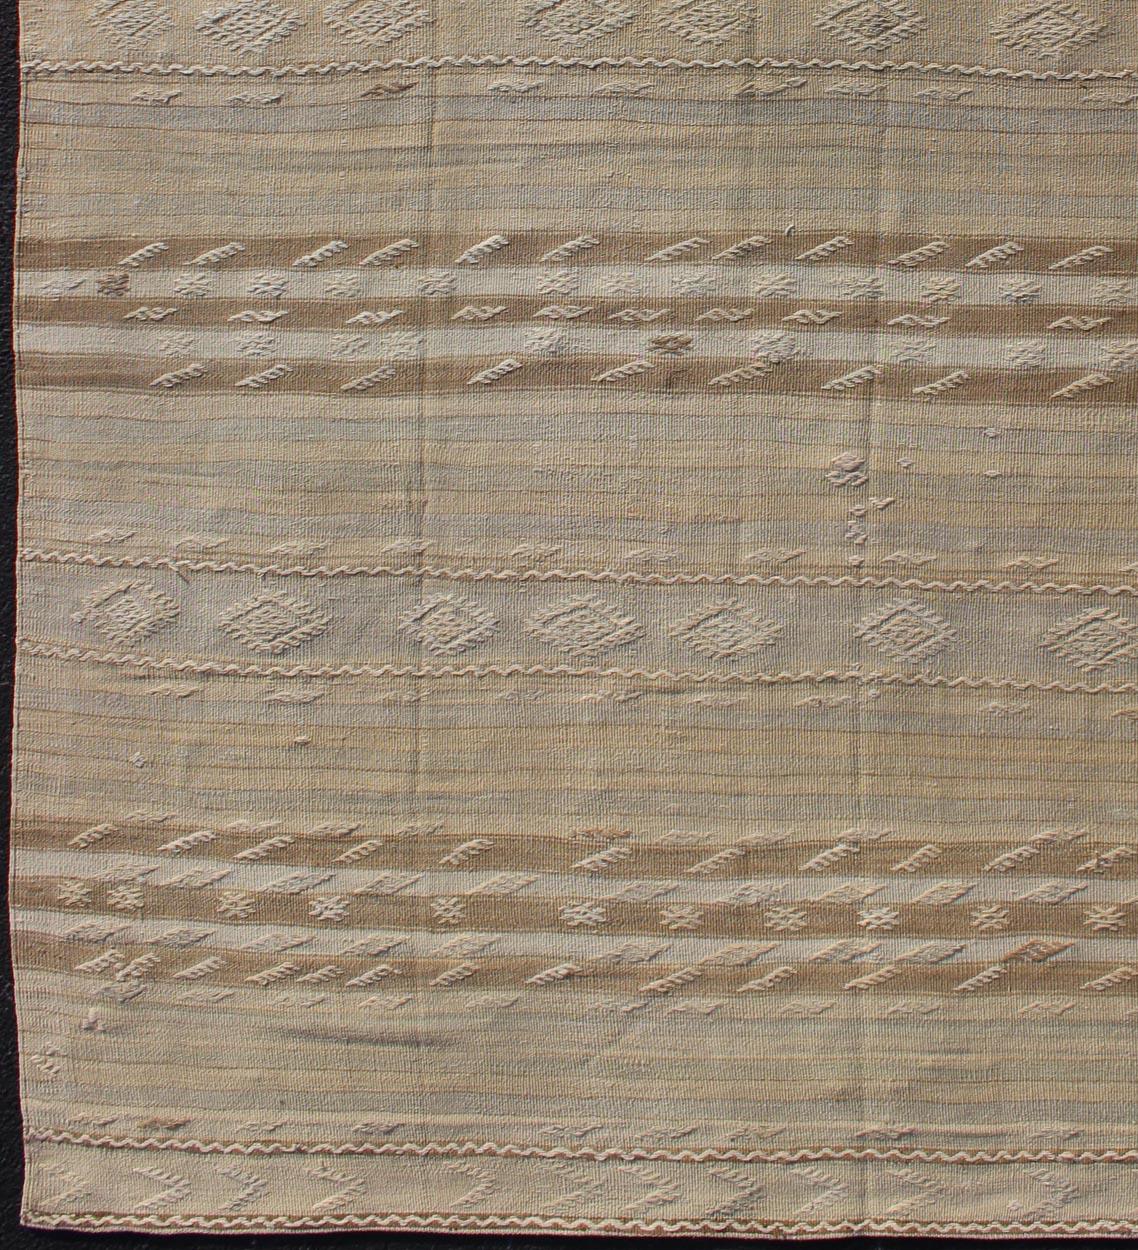 Minimalist stripe design Kilim from Turkey, rug EN-179246, country of origin / type: Turkey / Kilim, circa 1950

This vintage flat-woven Kilim runner features a Minimalist design rendered in thin brown stripes, set atop a taupe background with